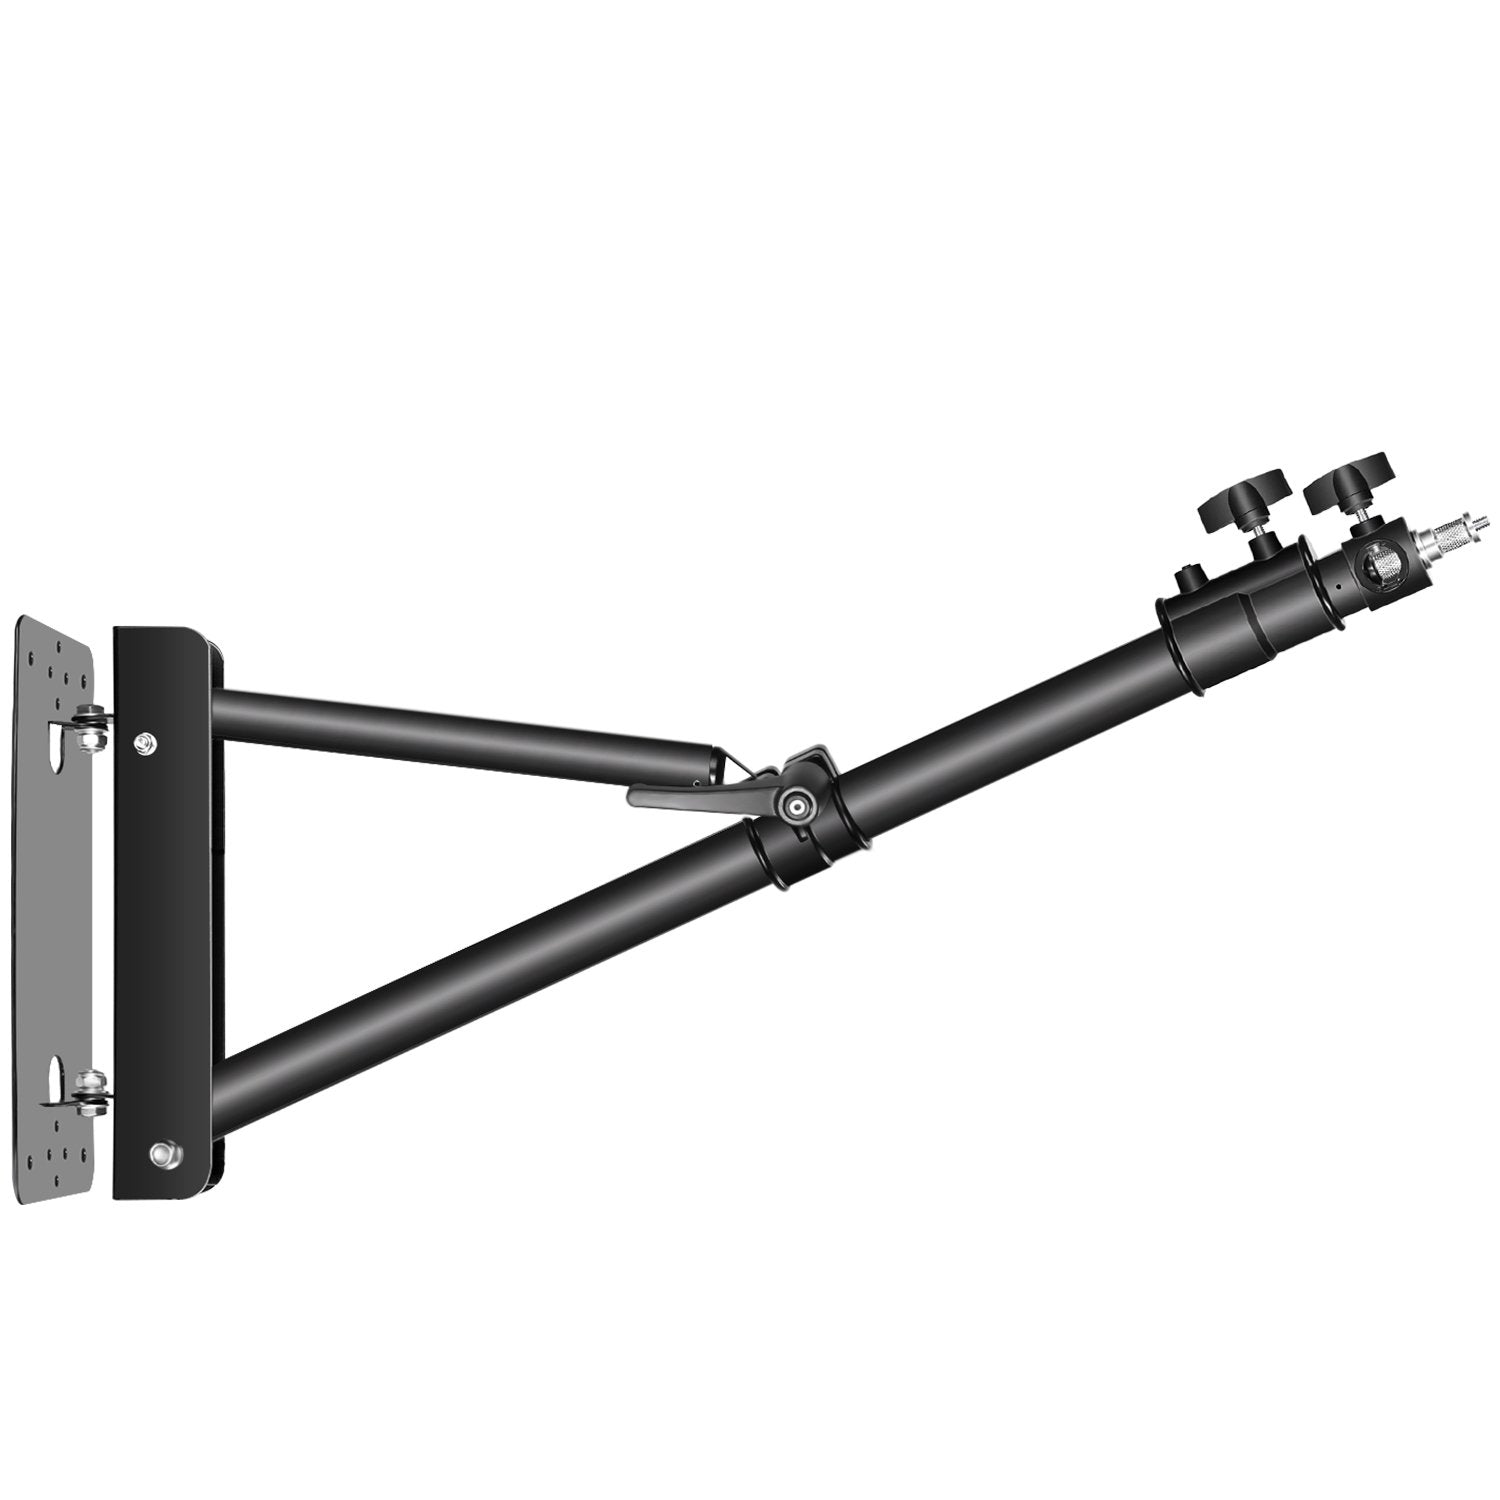 Neewer Triangle Wall Mounting Boom Arm for Photography Studio Video Strobe Lights Monolights Softboxes Umbrellas Reflectors,180 Degree Flexible Rotation,Max Length 70.8 inches/180 Centimeters (Black)